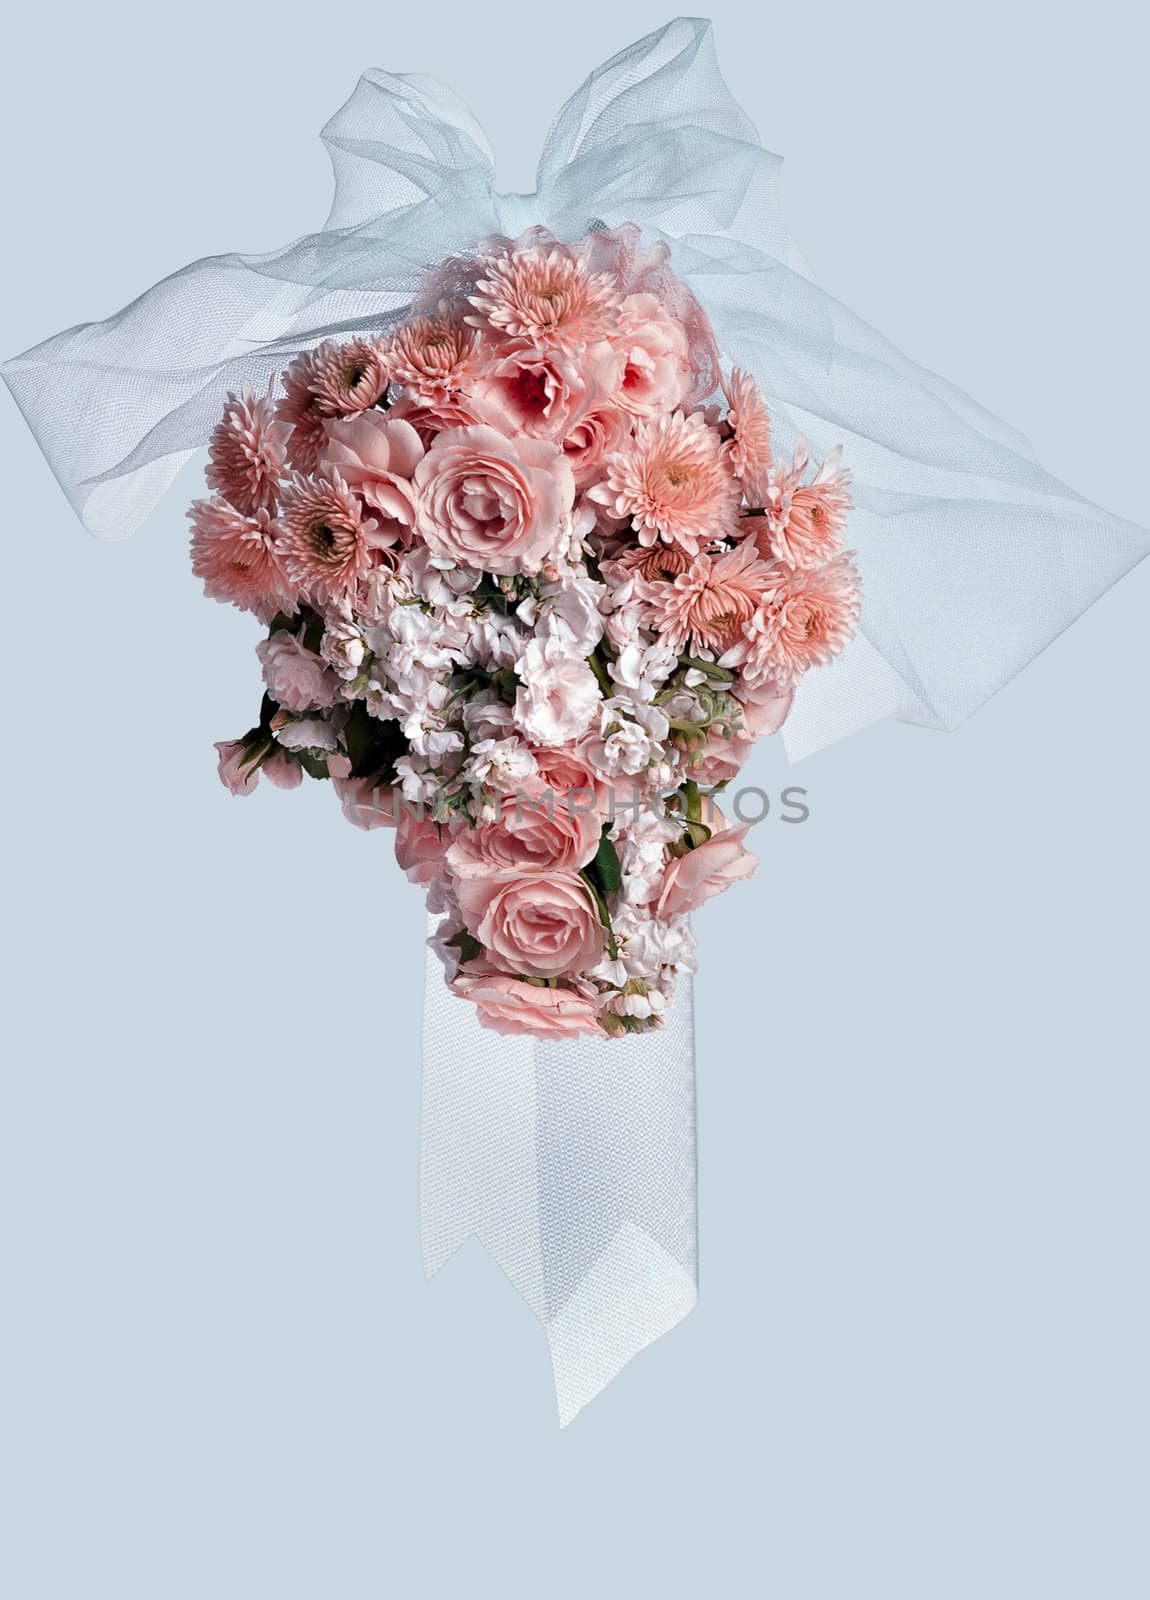 bouquet of flowers for wedding on a white background